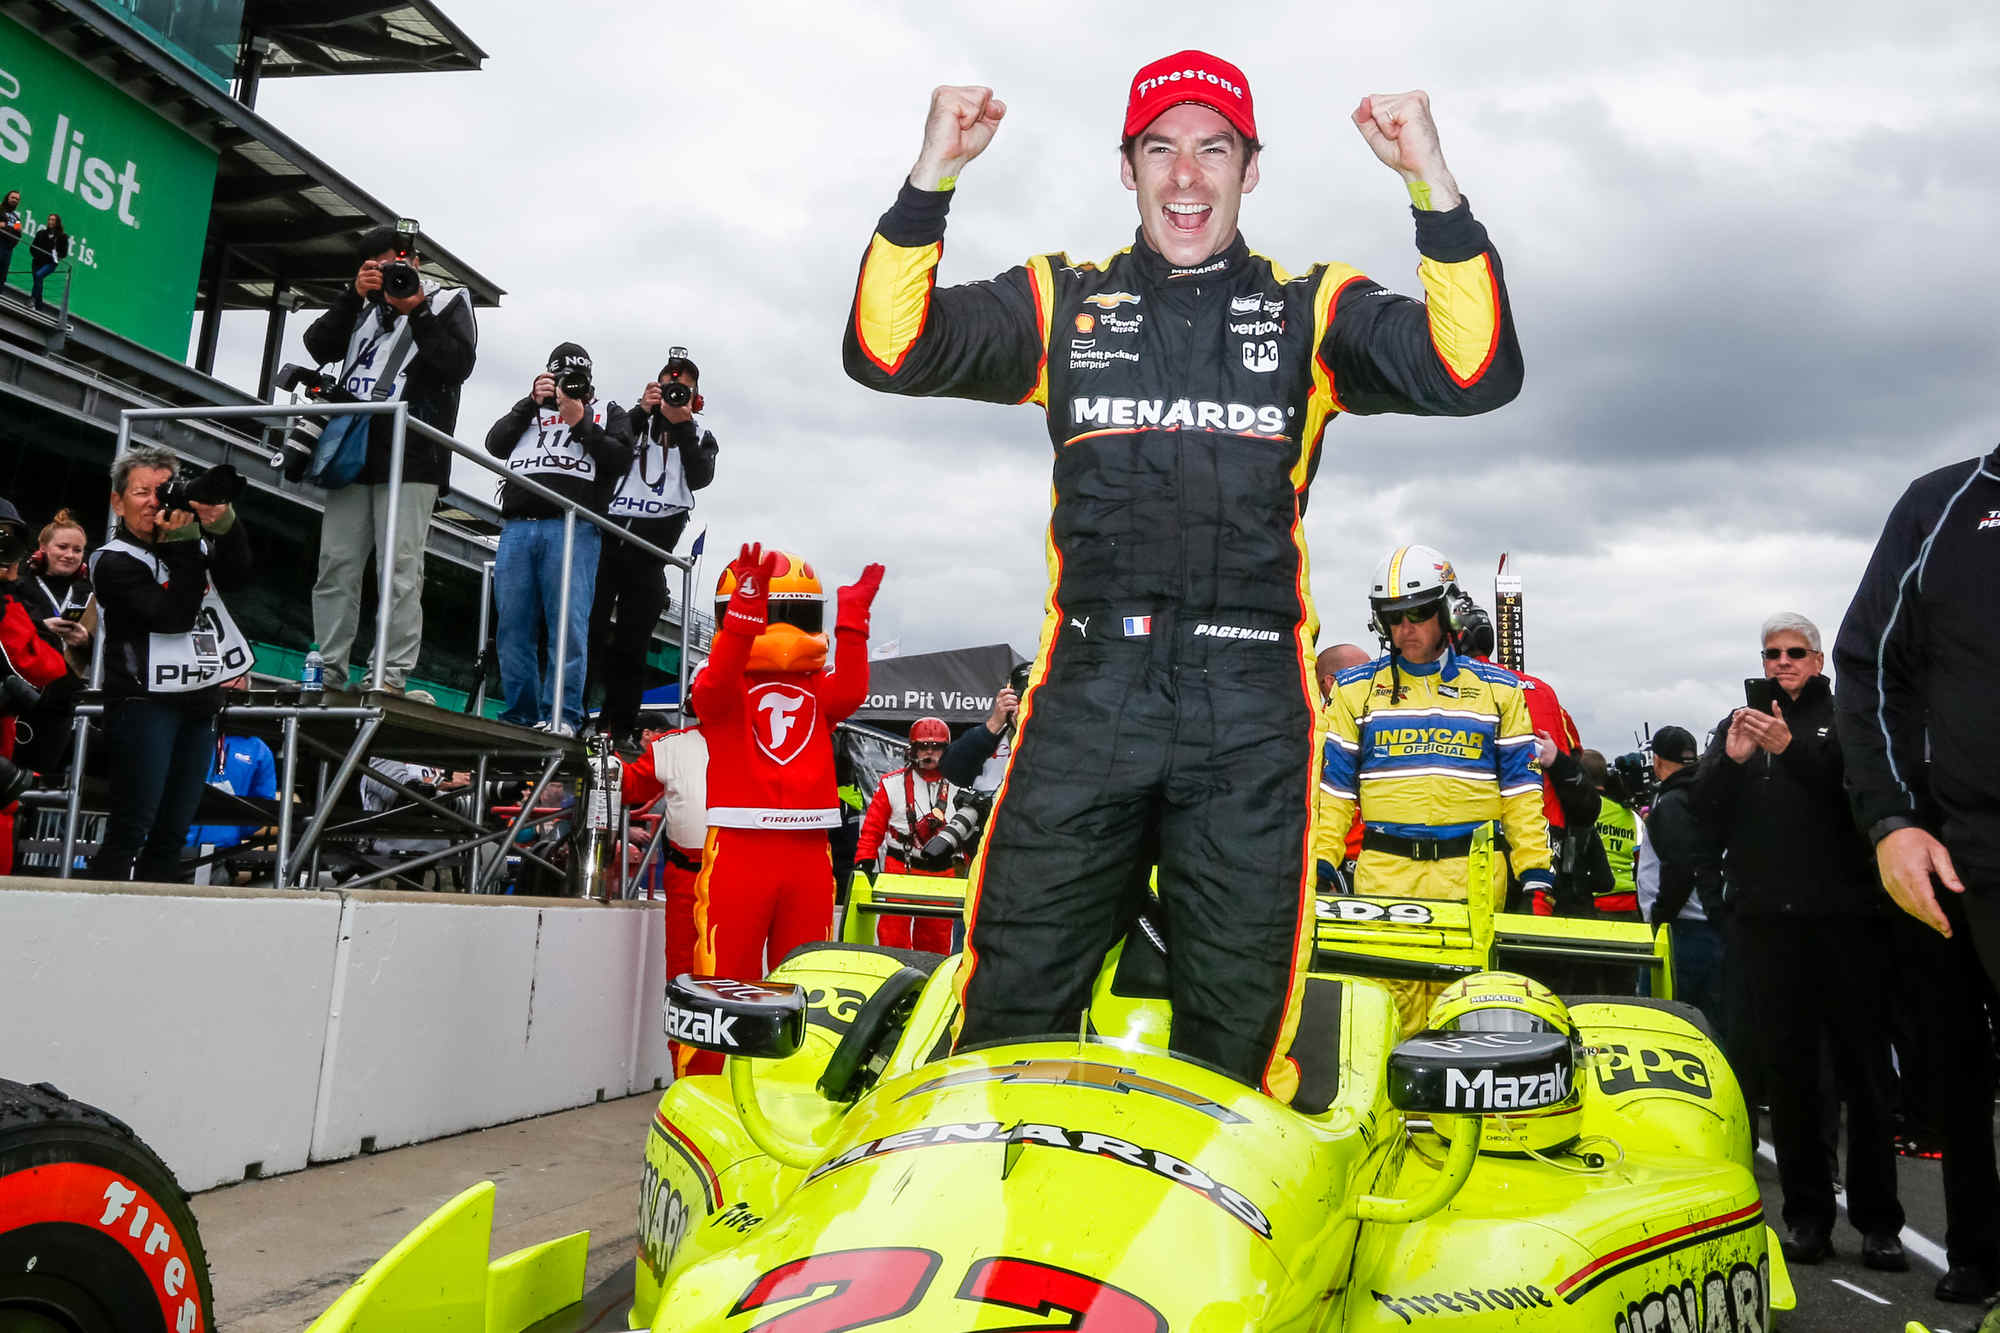 Will foreign born driver Simon Pagenaud win the Indy 500 too